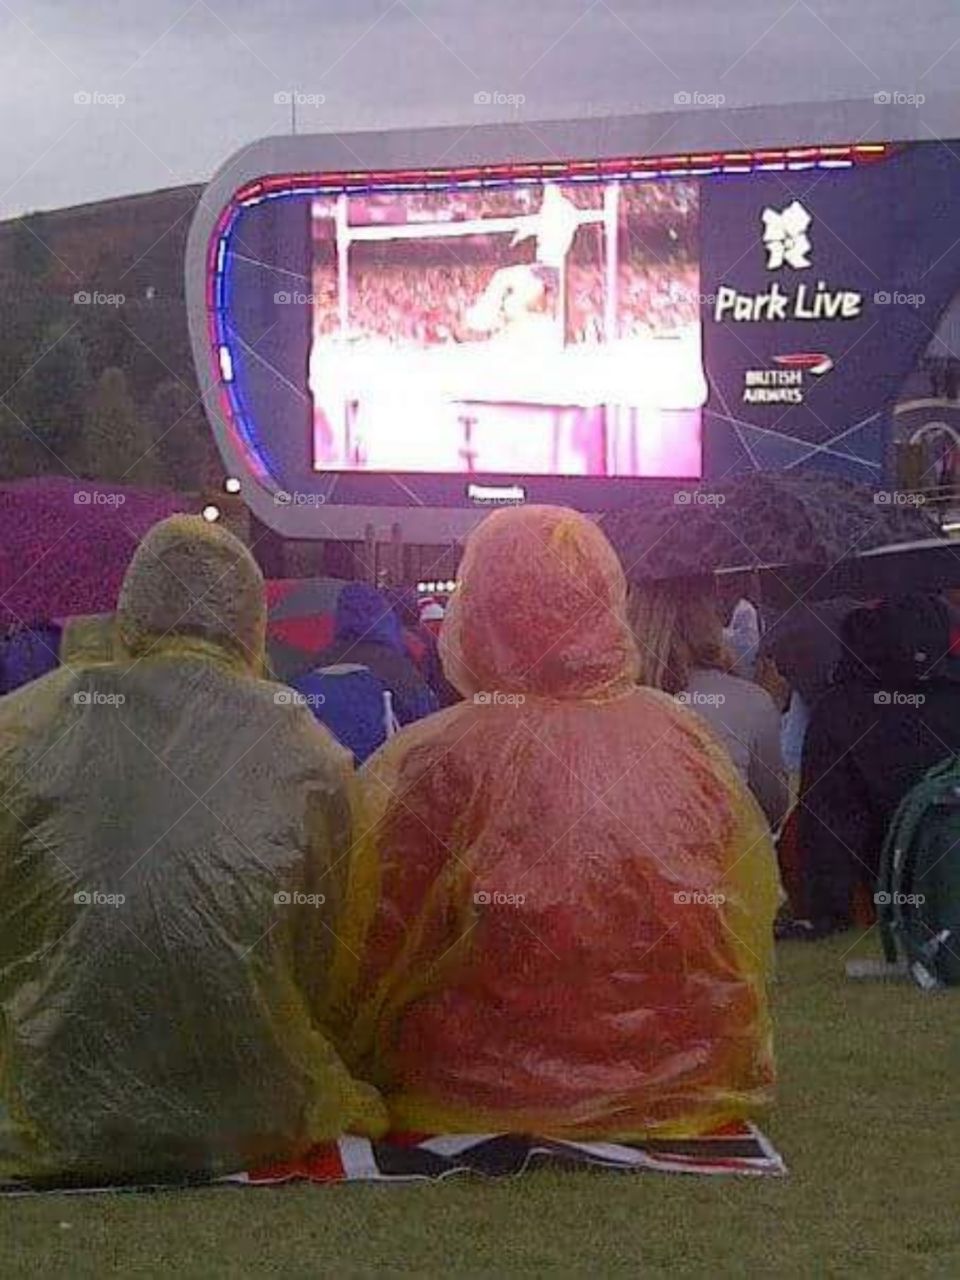 people watching the big screen at London 2012 Olympics in the rain